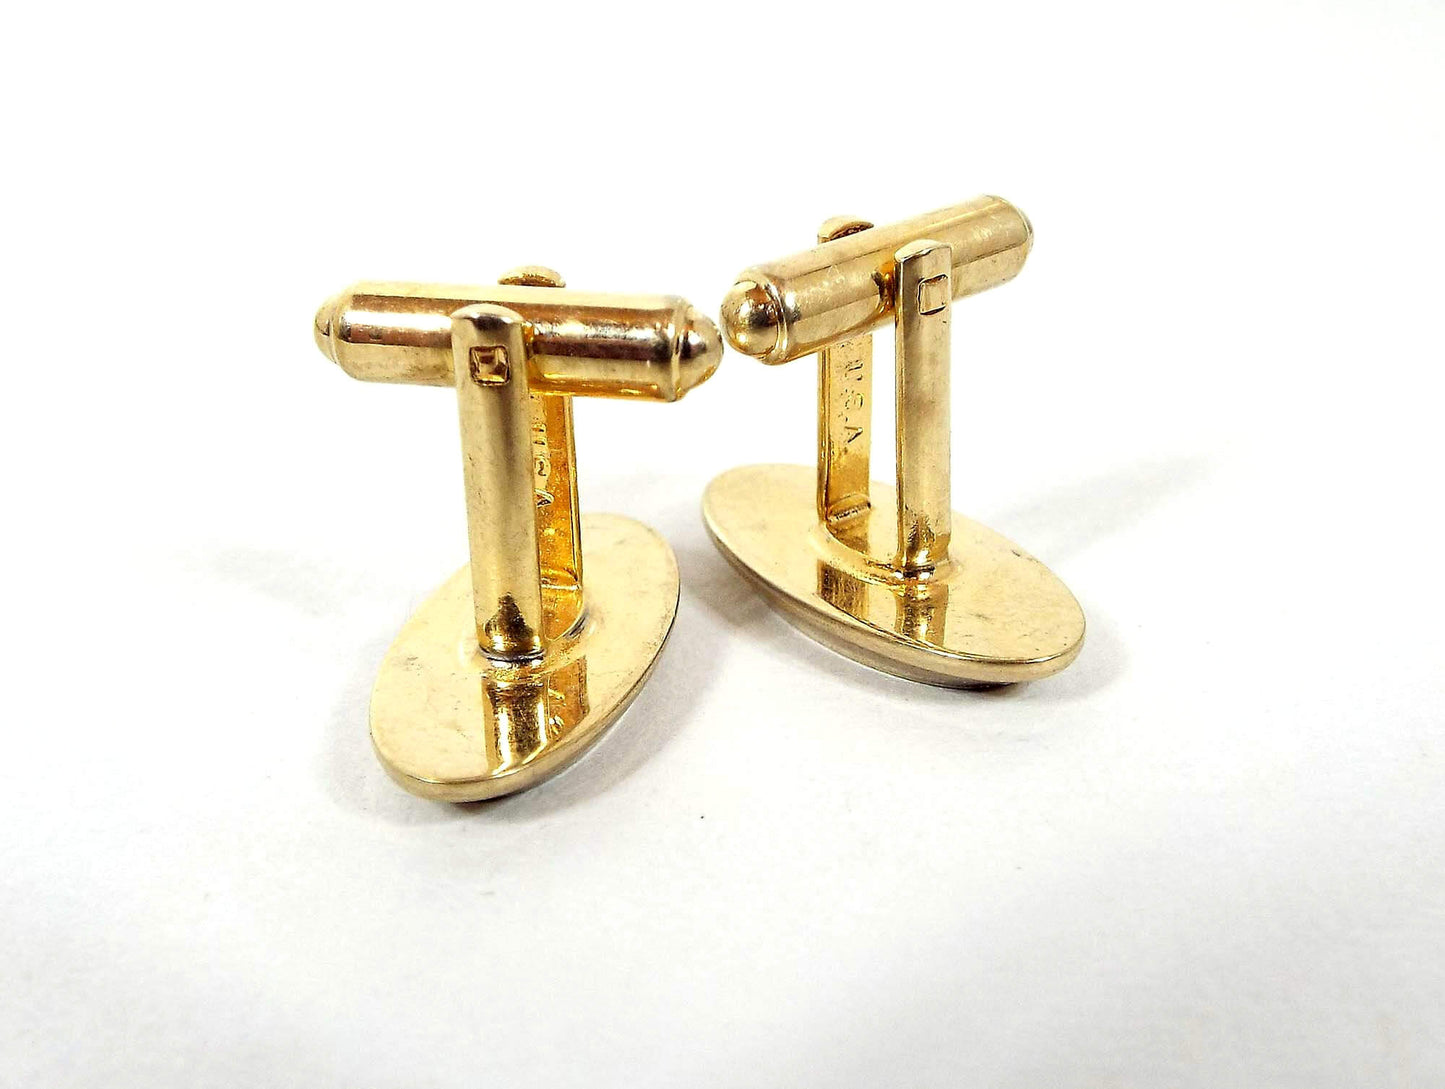 Hickok Two Tone Letter Initial J Vintage Cufflinks, Mid Century Cuff Links